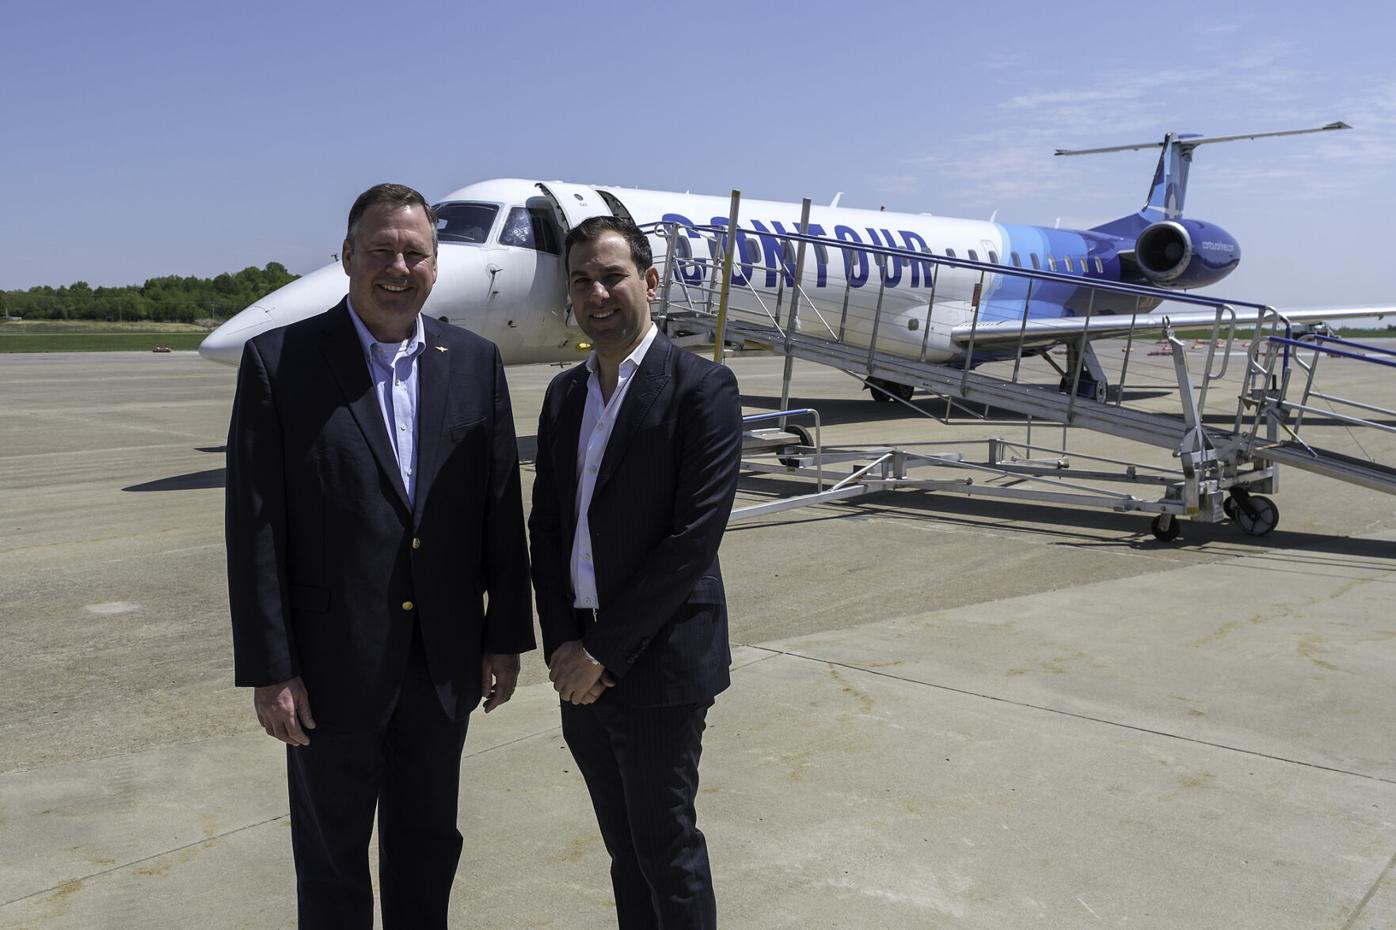 Contour Airlines takes first flight from Marion to Chicago, Marion